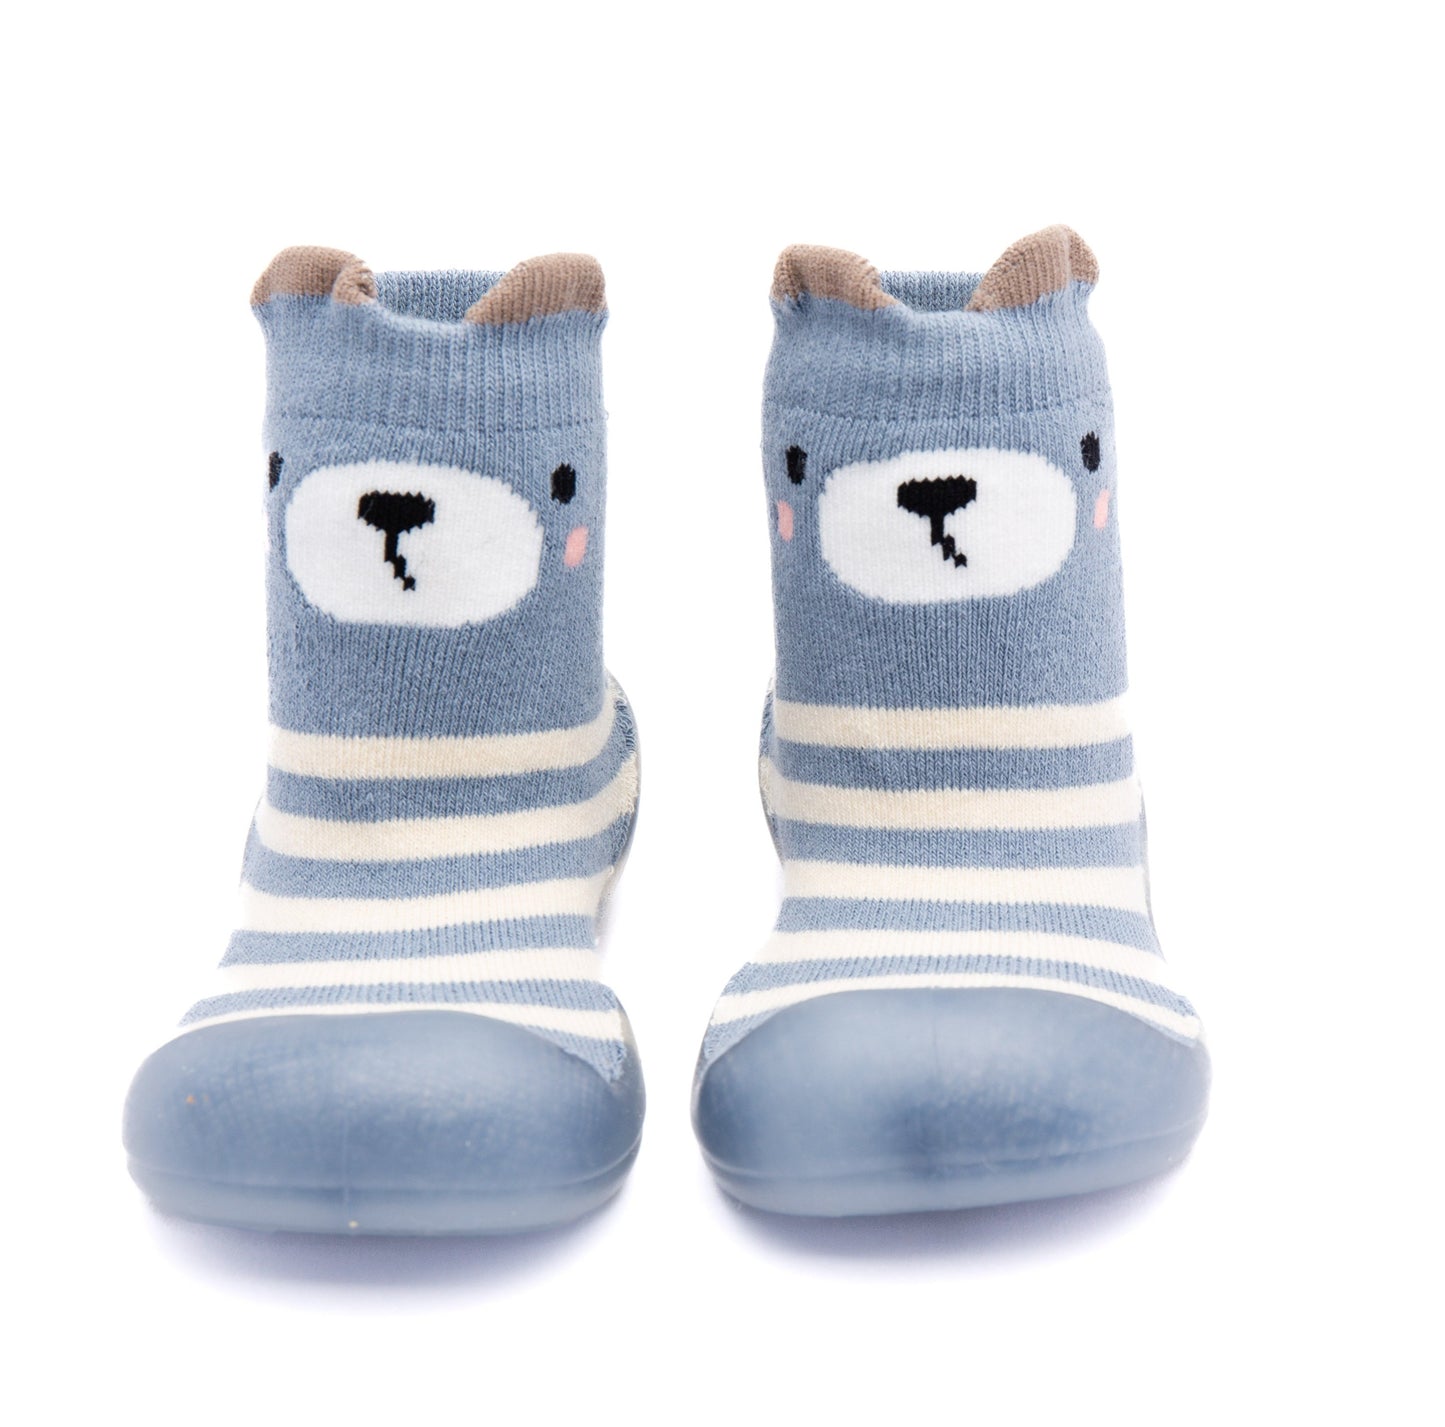 blue bear sock shoes for baby toddler and kids 